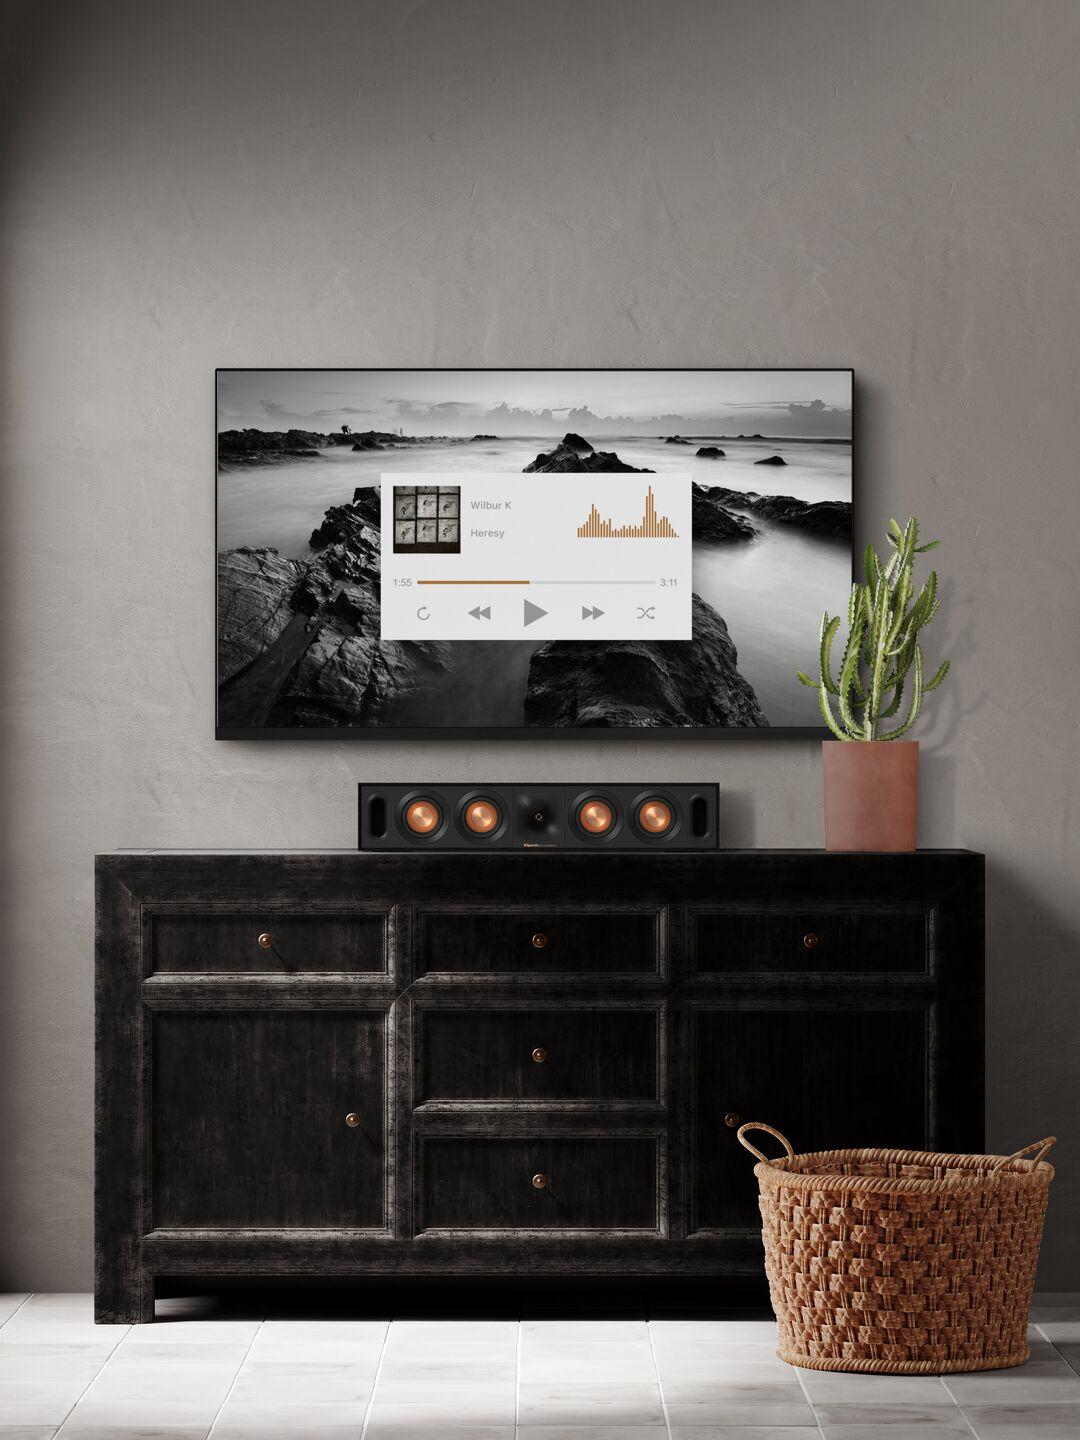 Klipsch goes all-out with a major update of its two most popular speaker lines a9c8036f web ready reference lifestyle 07 r 30c